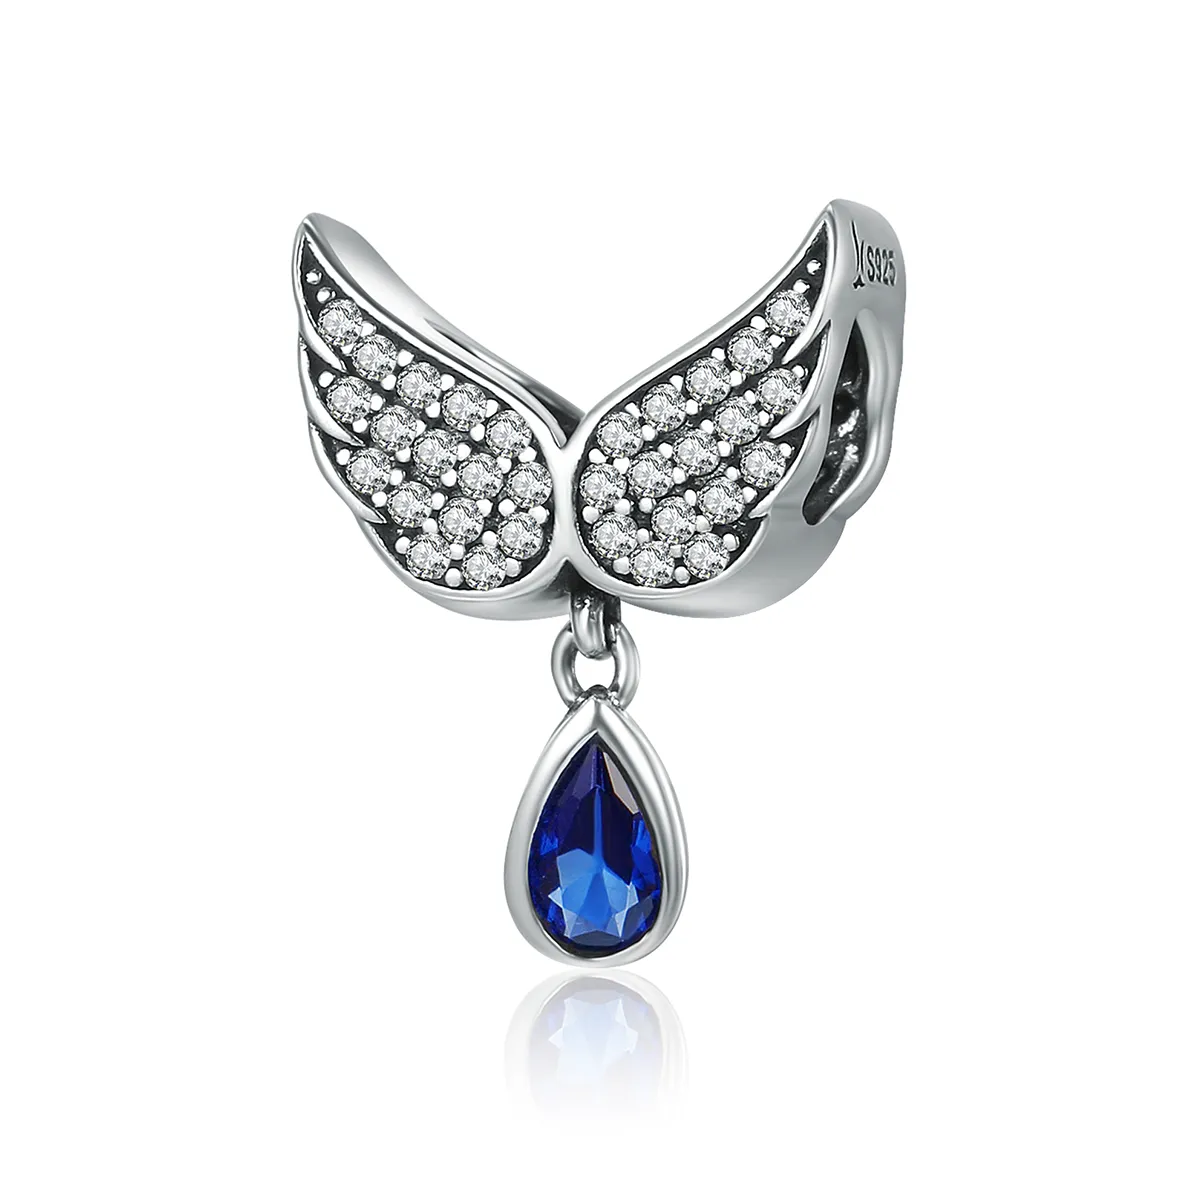 Pandora Style Silver Angel Wings Charm - SCC481